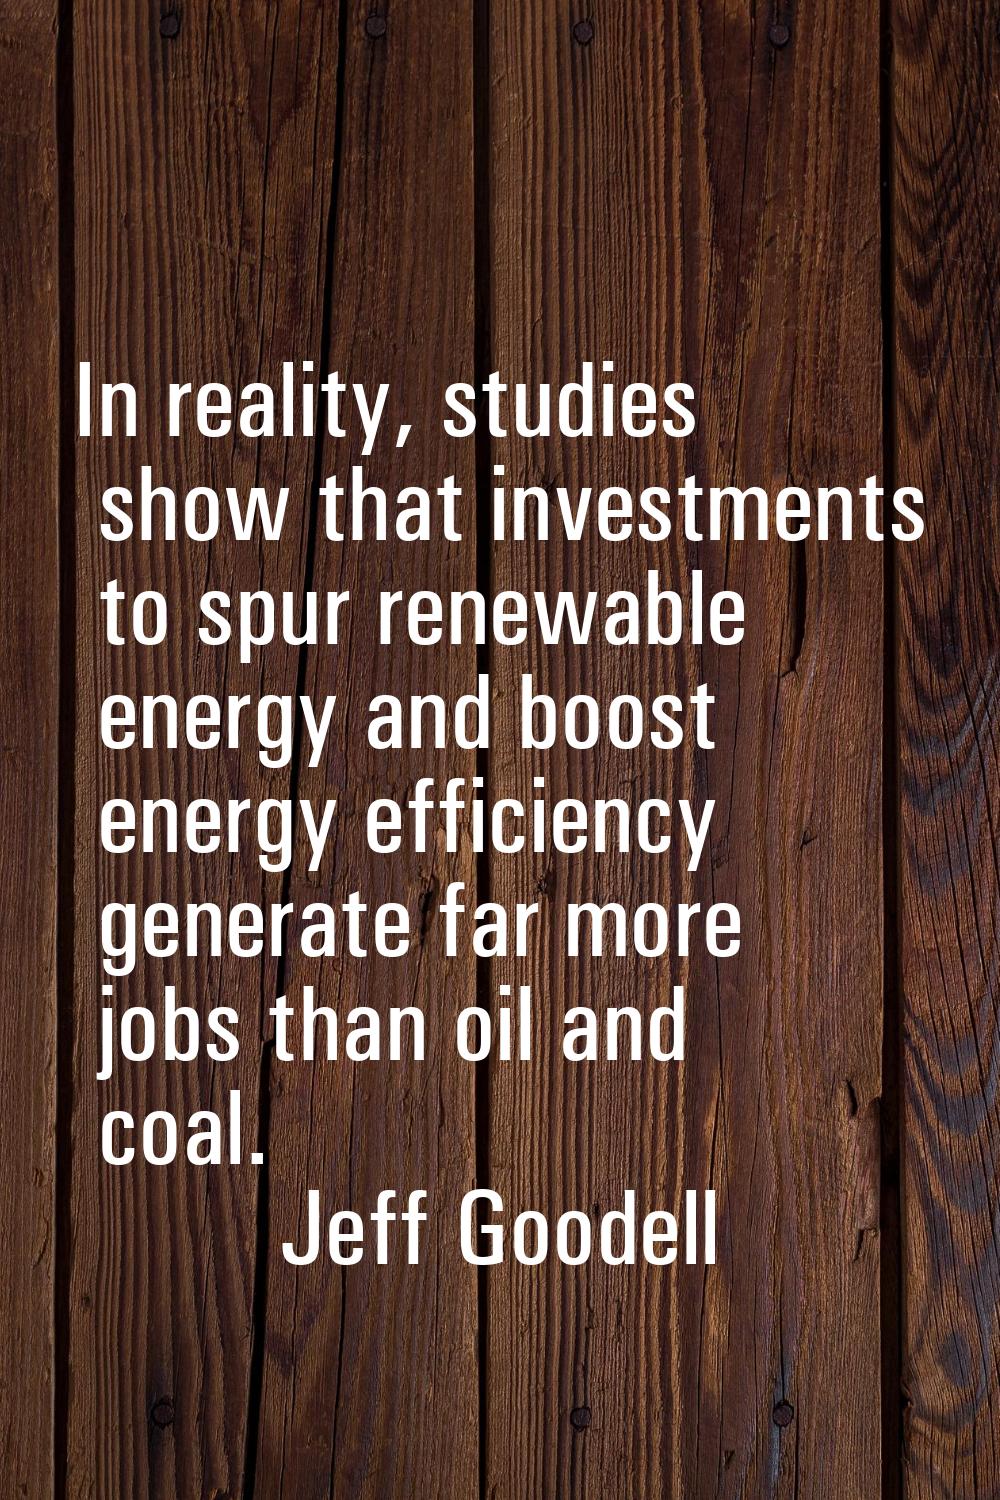 In reality, studies show that investments to spur renewable energy and boost energy efficiency gene